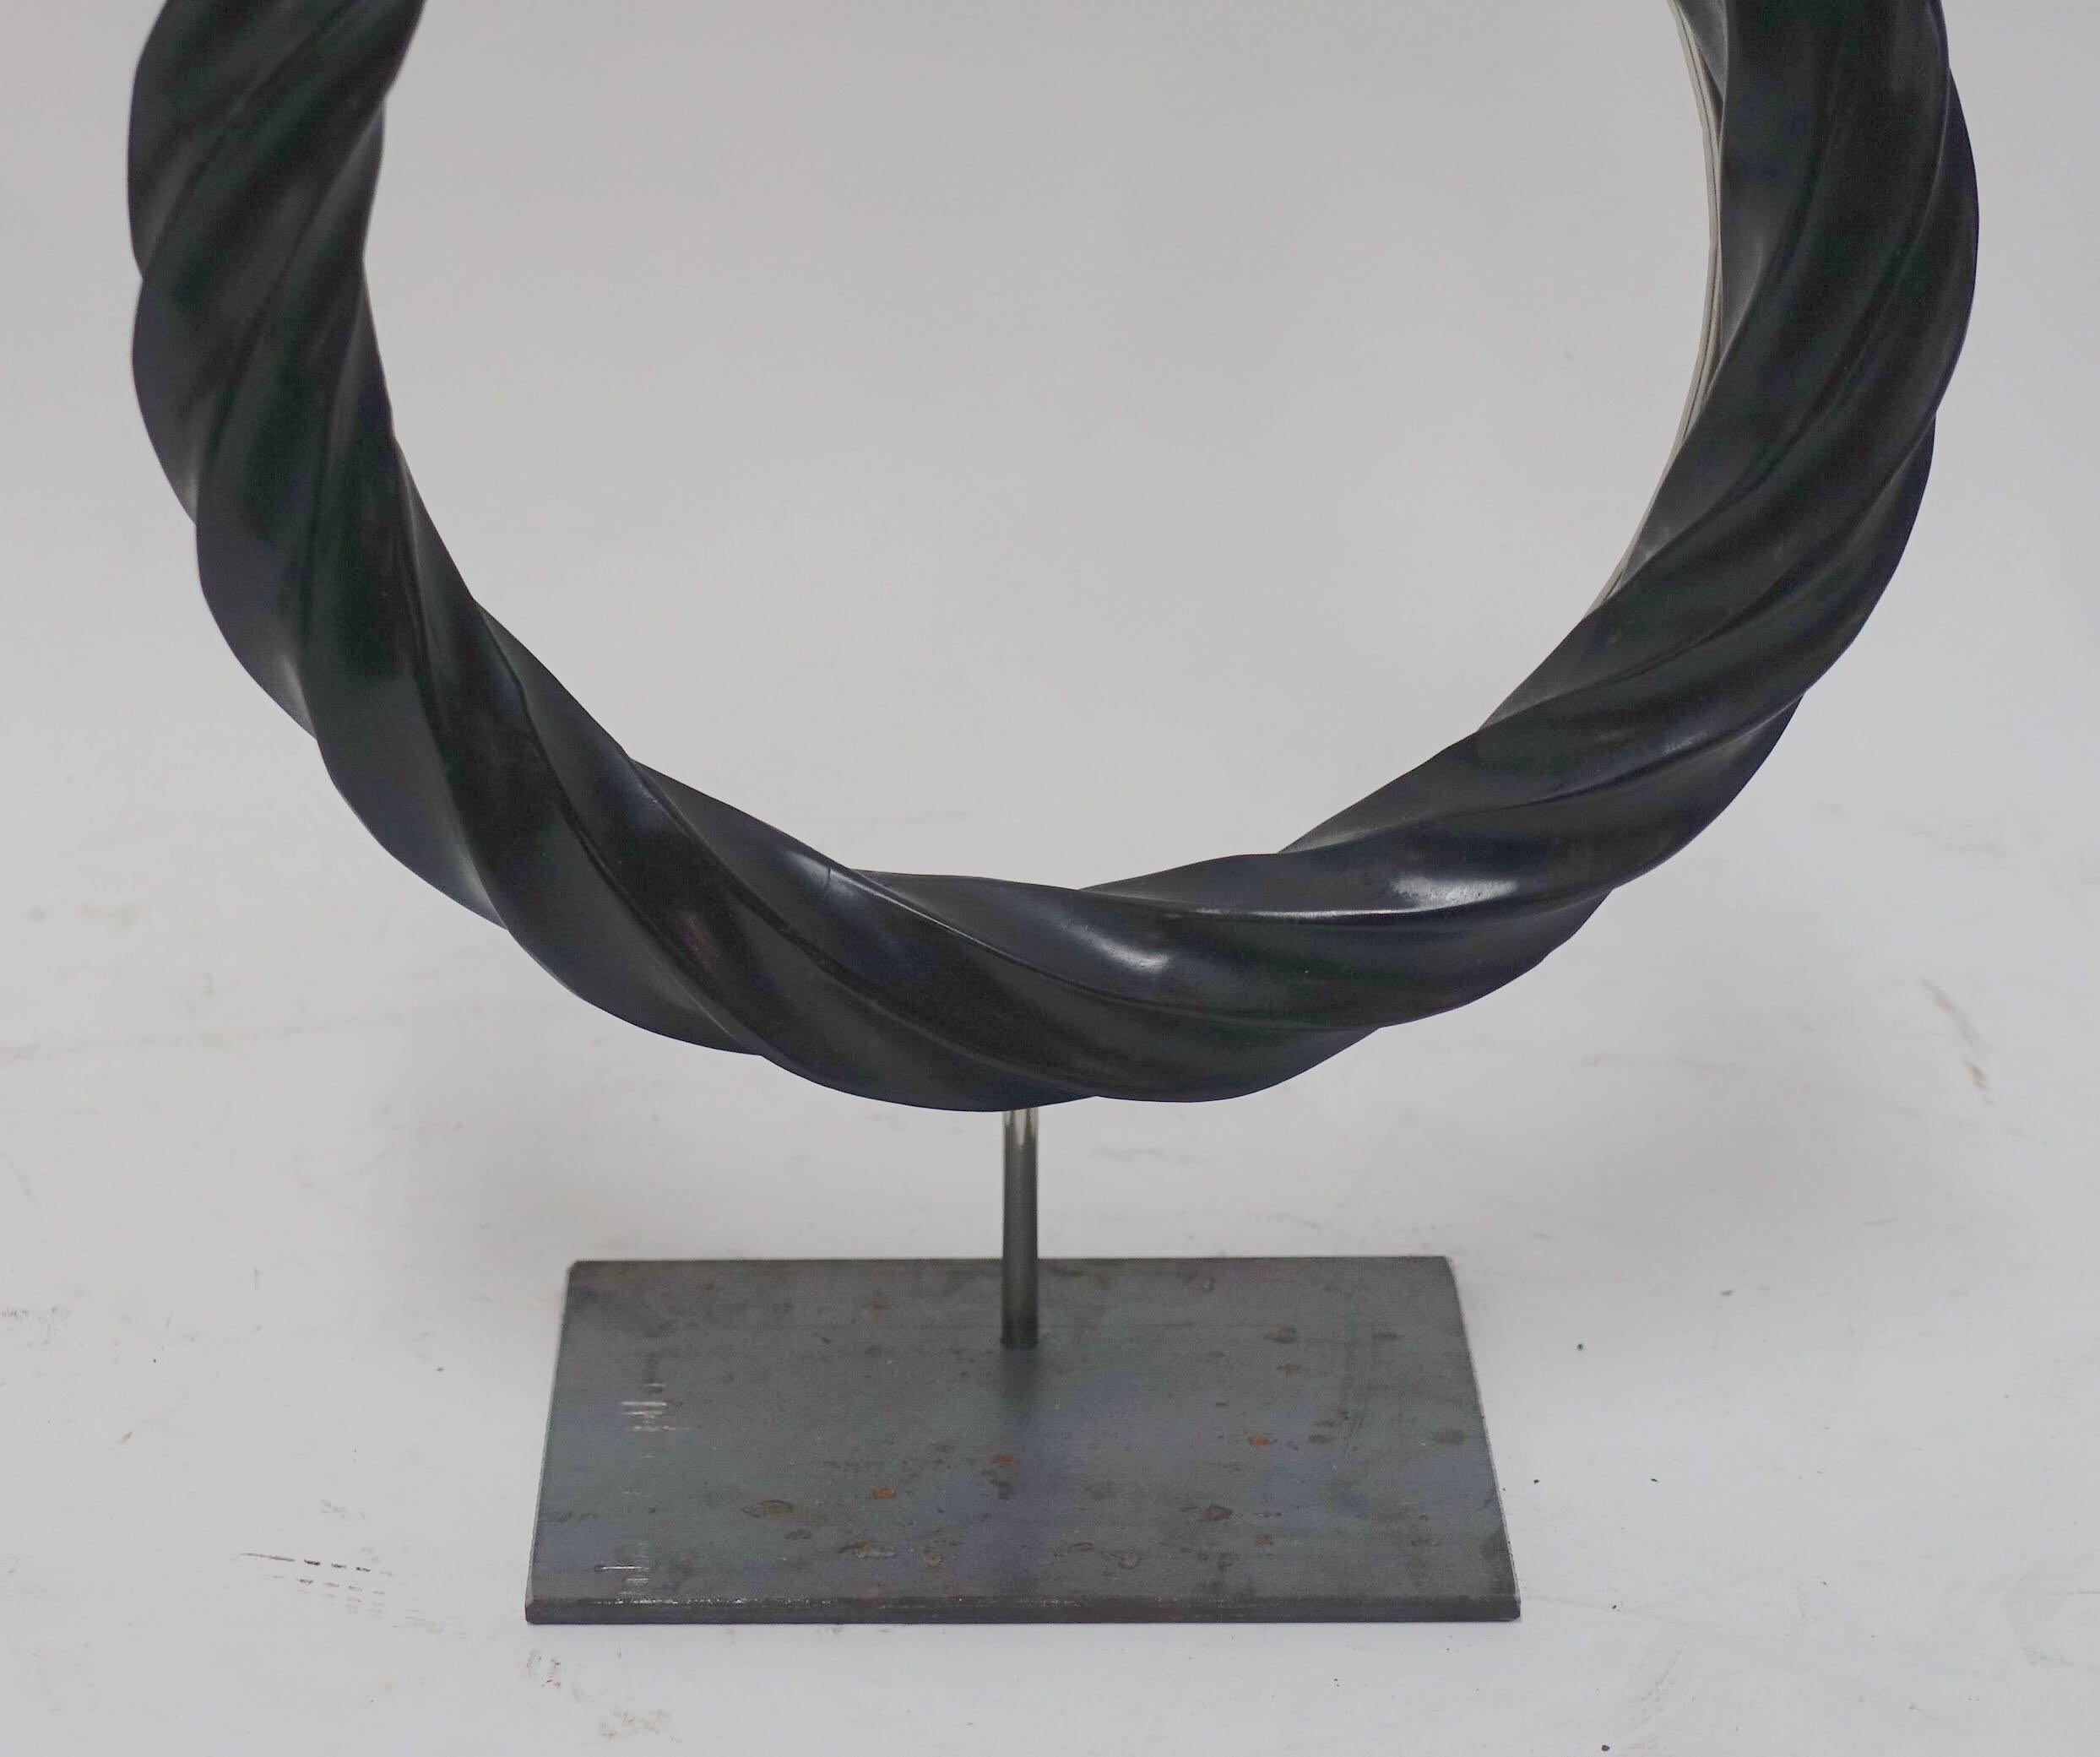 Pair of Black Twisted Marble Ring Sculptures on Stands, China, Contemporary 1